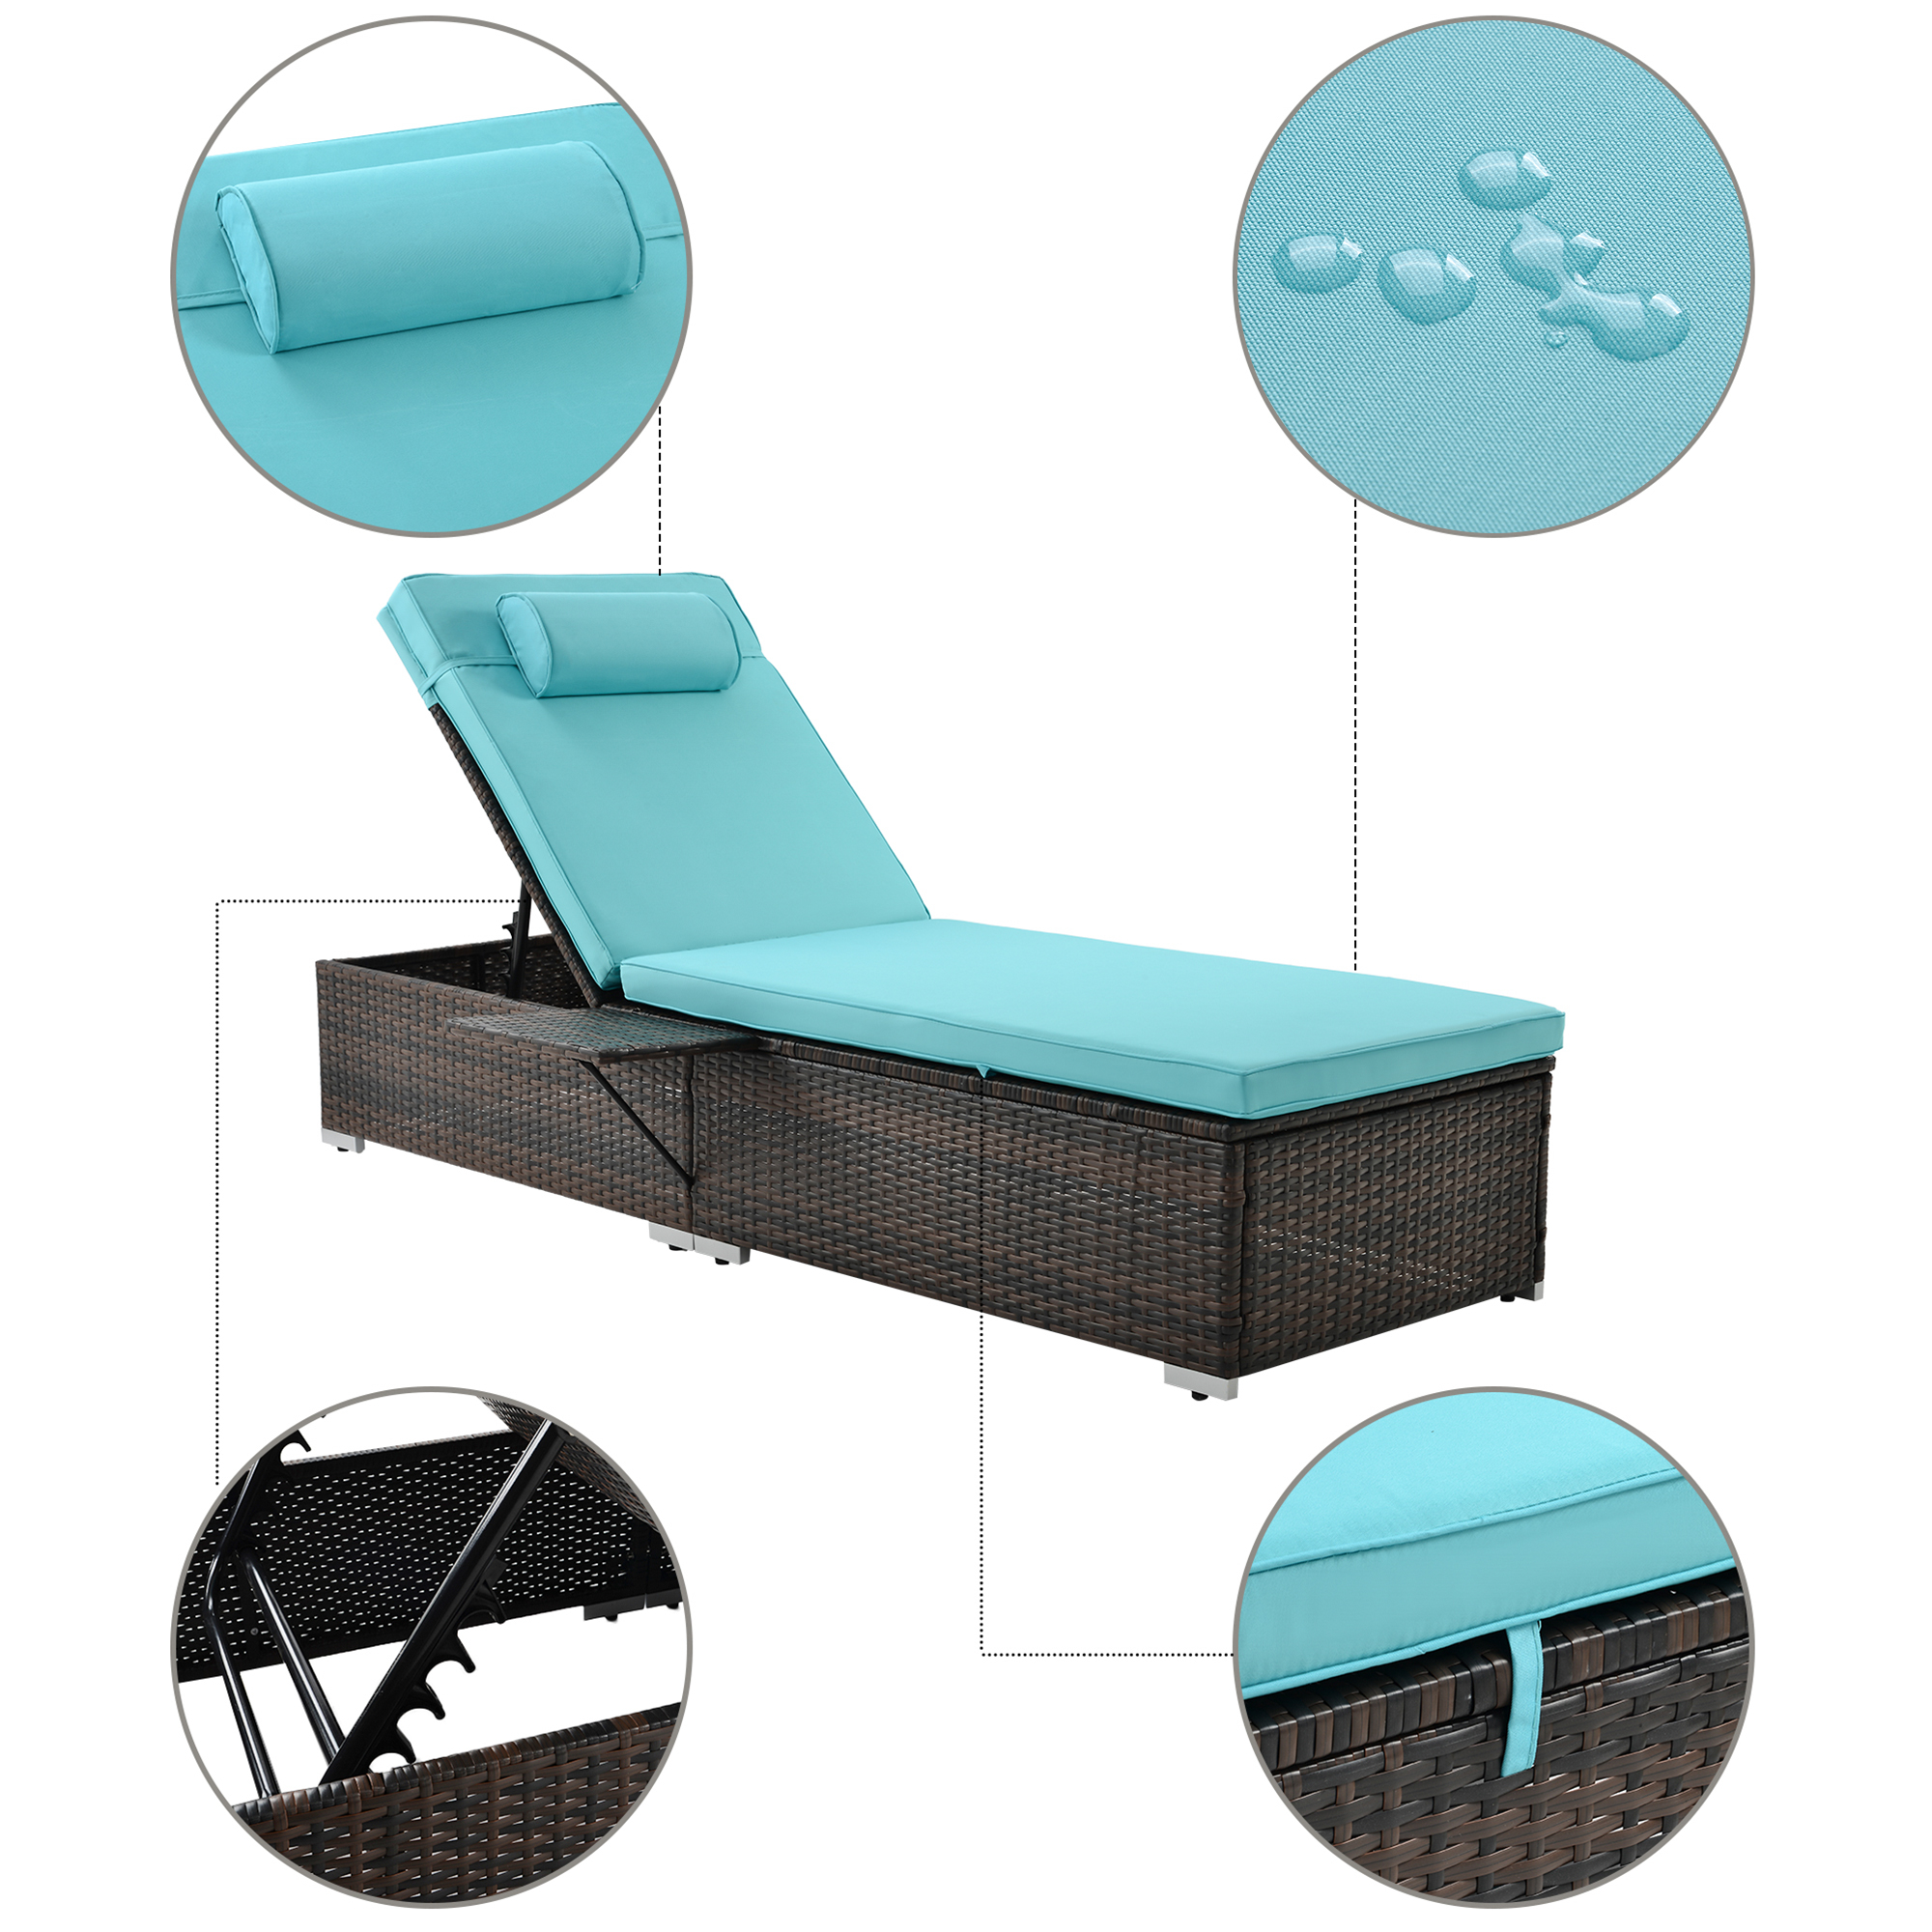 SYNGAR 2 PCS Patio Furniture Outdoor Patio Lounge Chairs, Adjustable Reclining Chair, Lawn Poolside Chaise Lounge Chair, PE Rattan Patio Seating with Side Table, Comfort Head Pillow, Brown & Blue - image 3 of 10